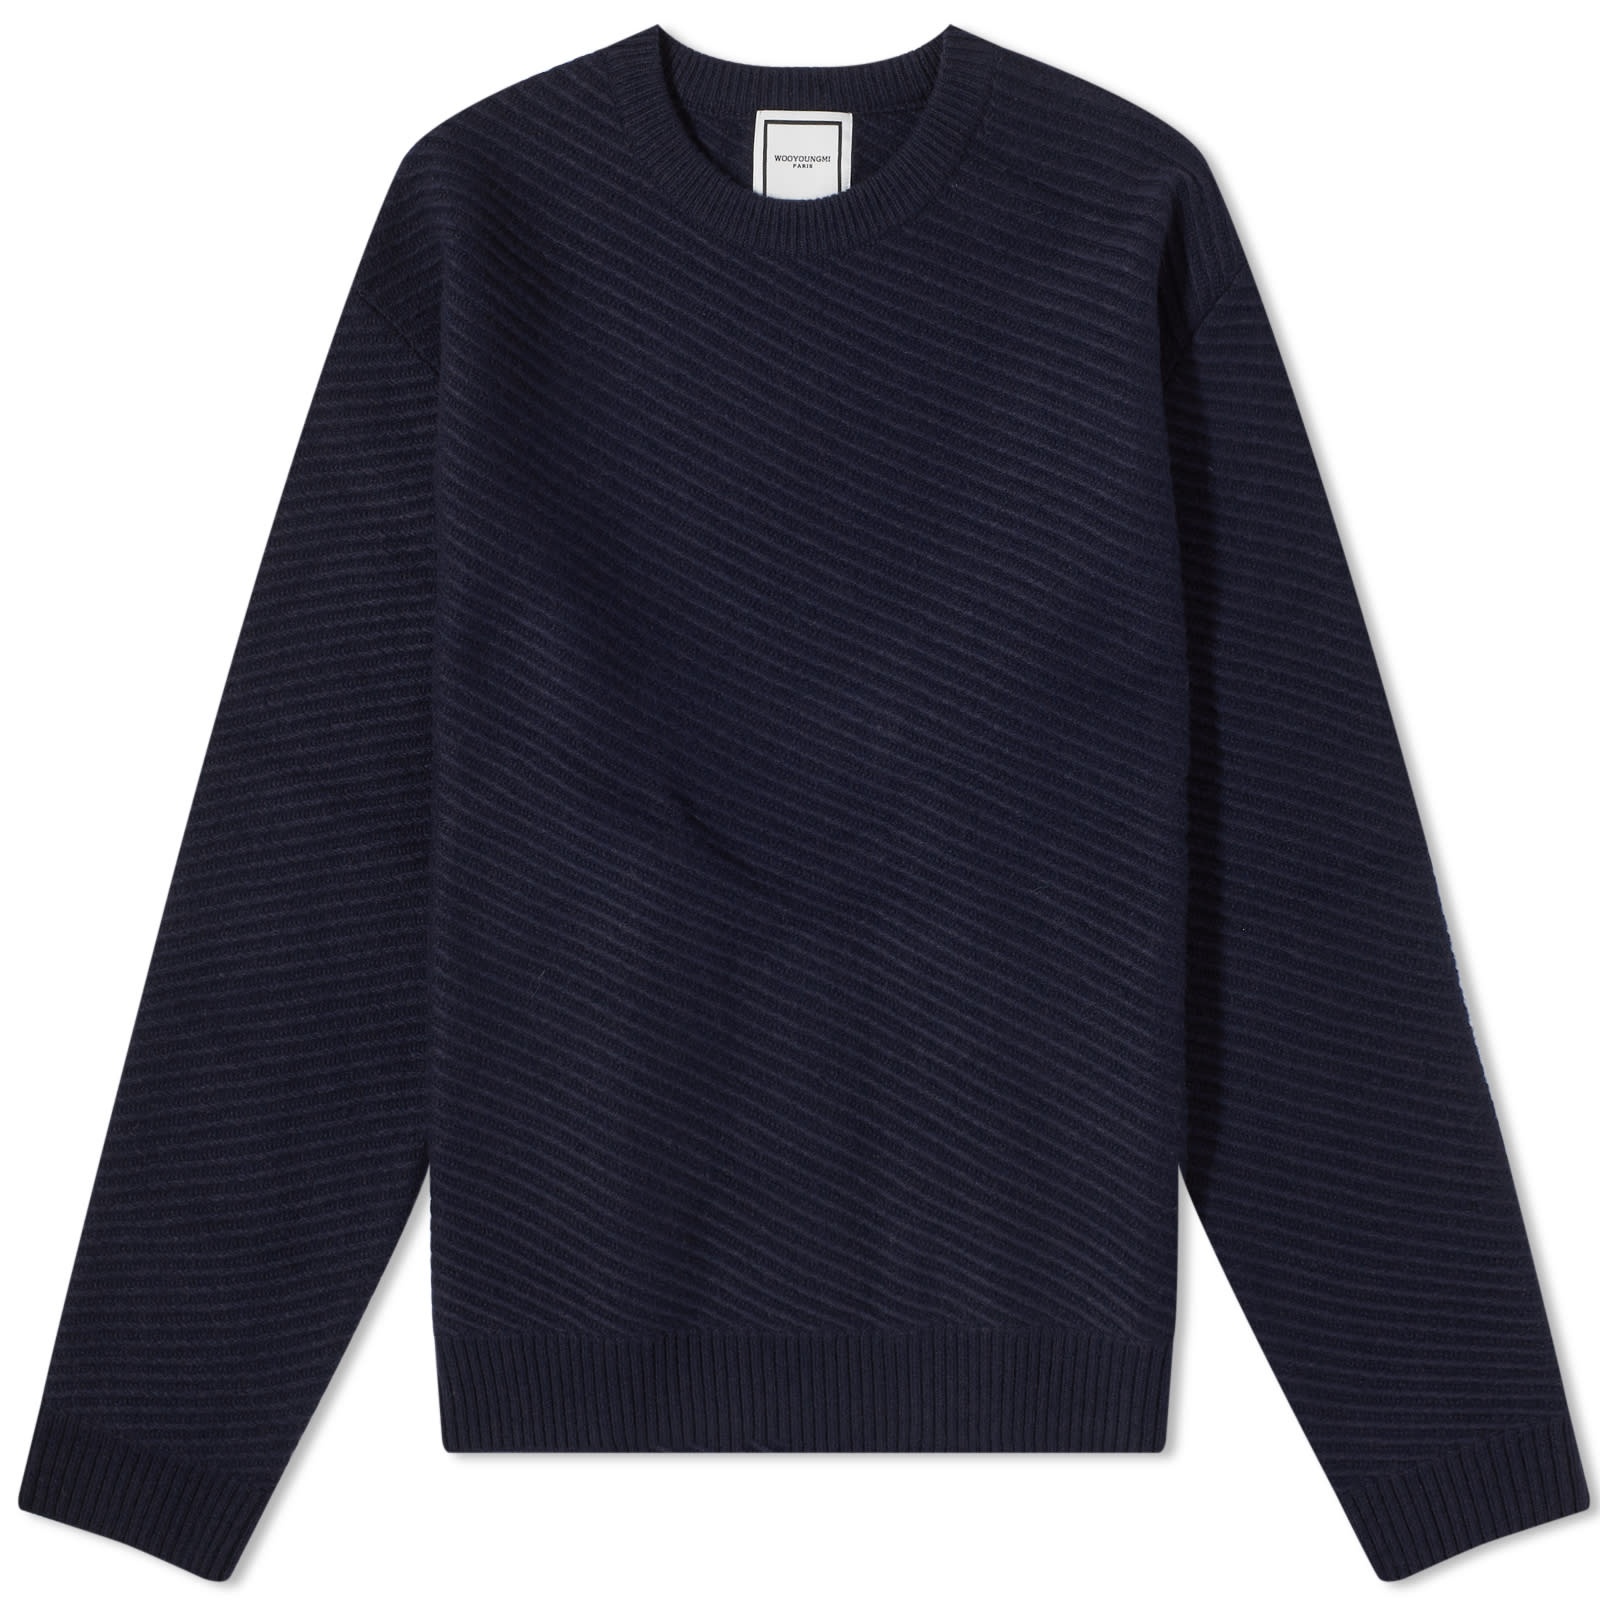 Wooyoungmi Textured Crew Knit - 1